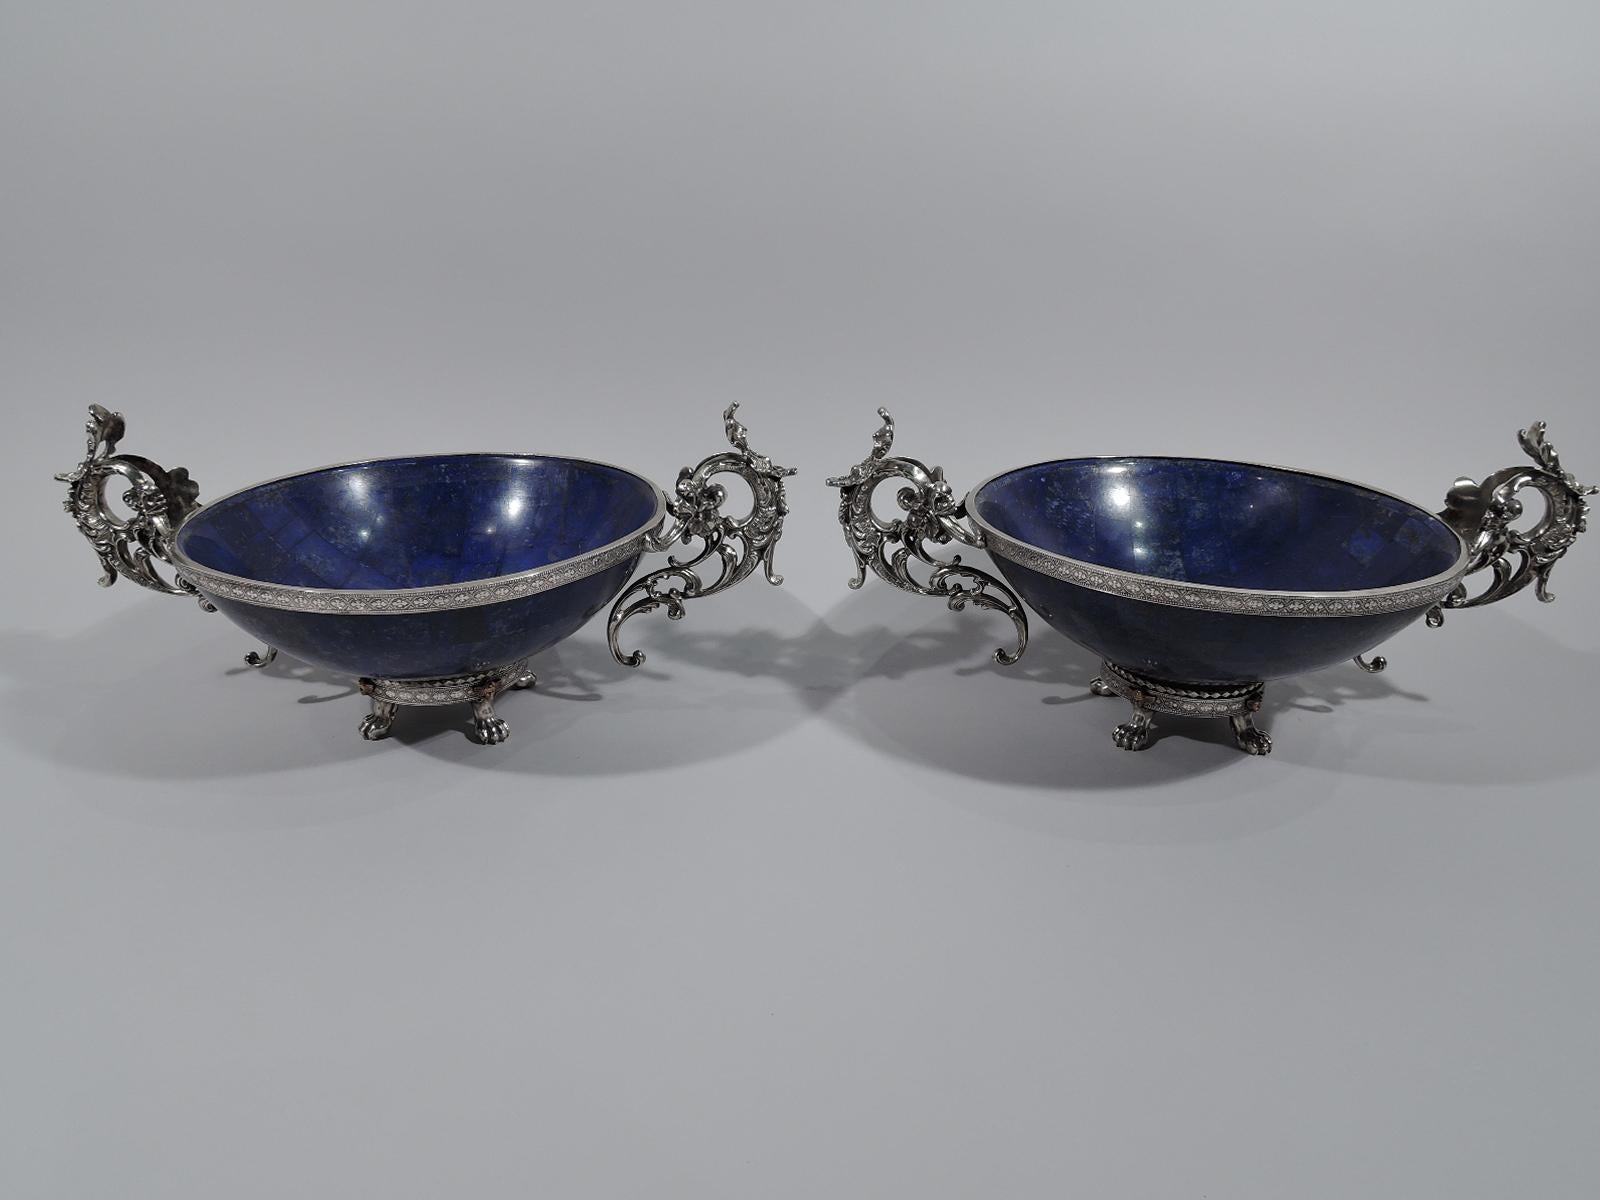 Pair of lapis lazuli bowls with 950 silver mounts. Made by Puiforcat in France, circa 1880. Each: Round tessellated bowl with silver rim collar and foot ring mounted to four paw supports. Elaborate open scroll side handles with leaves and flowers.